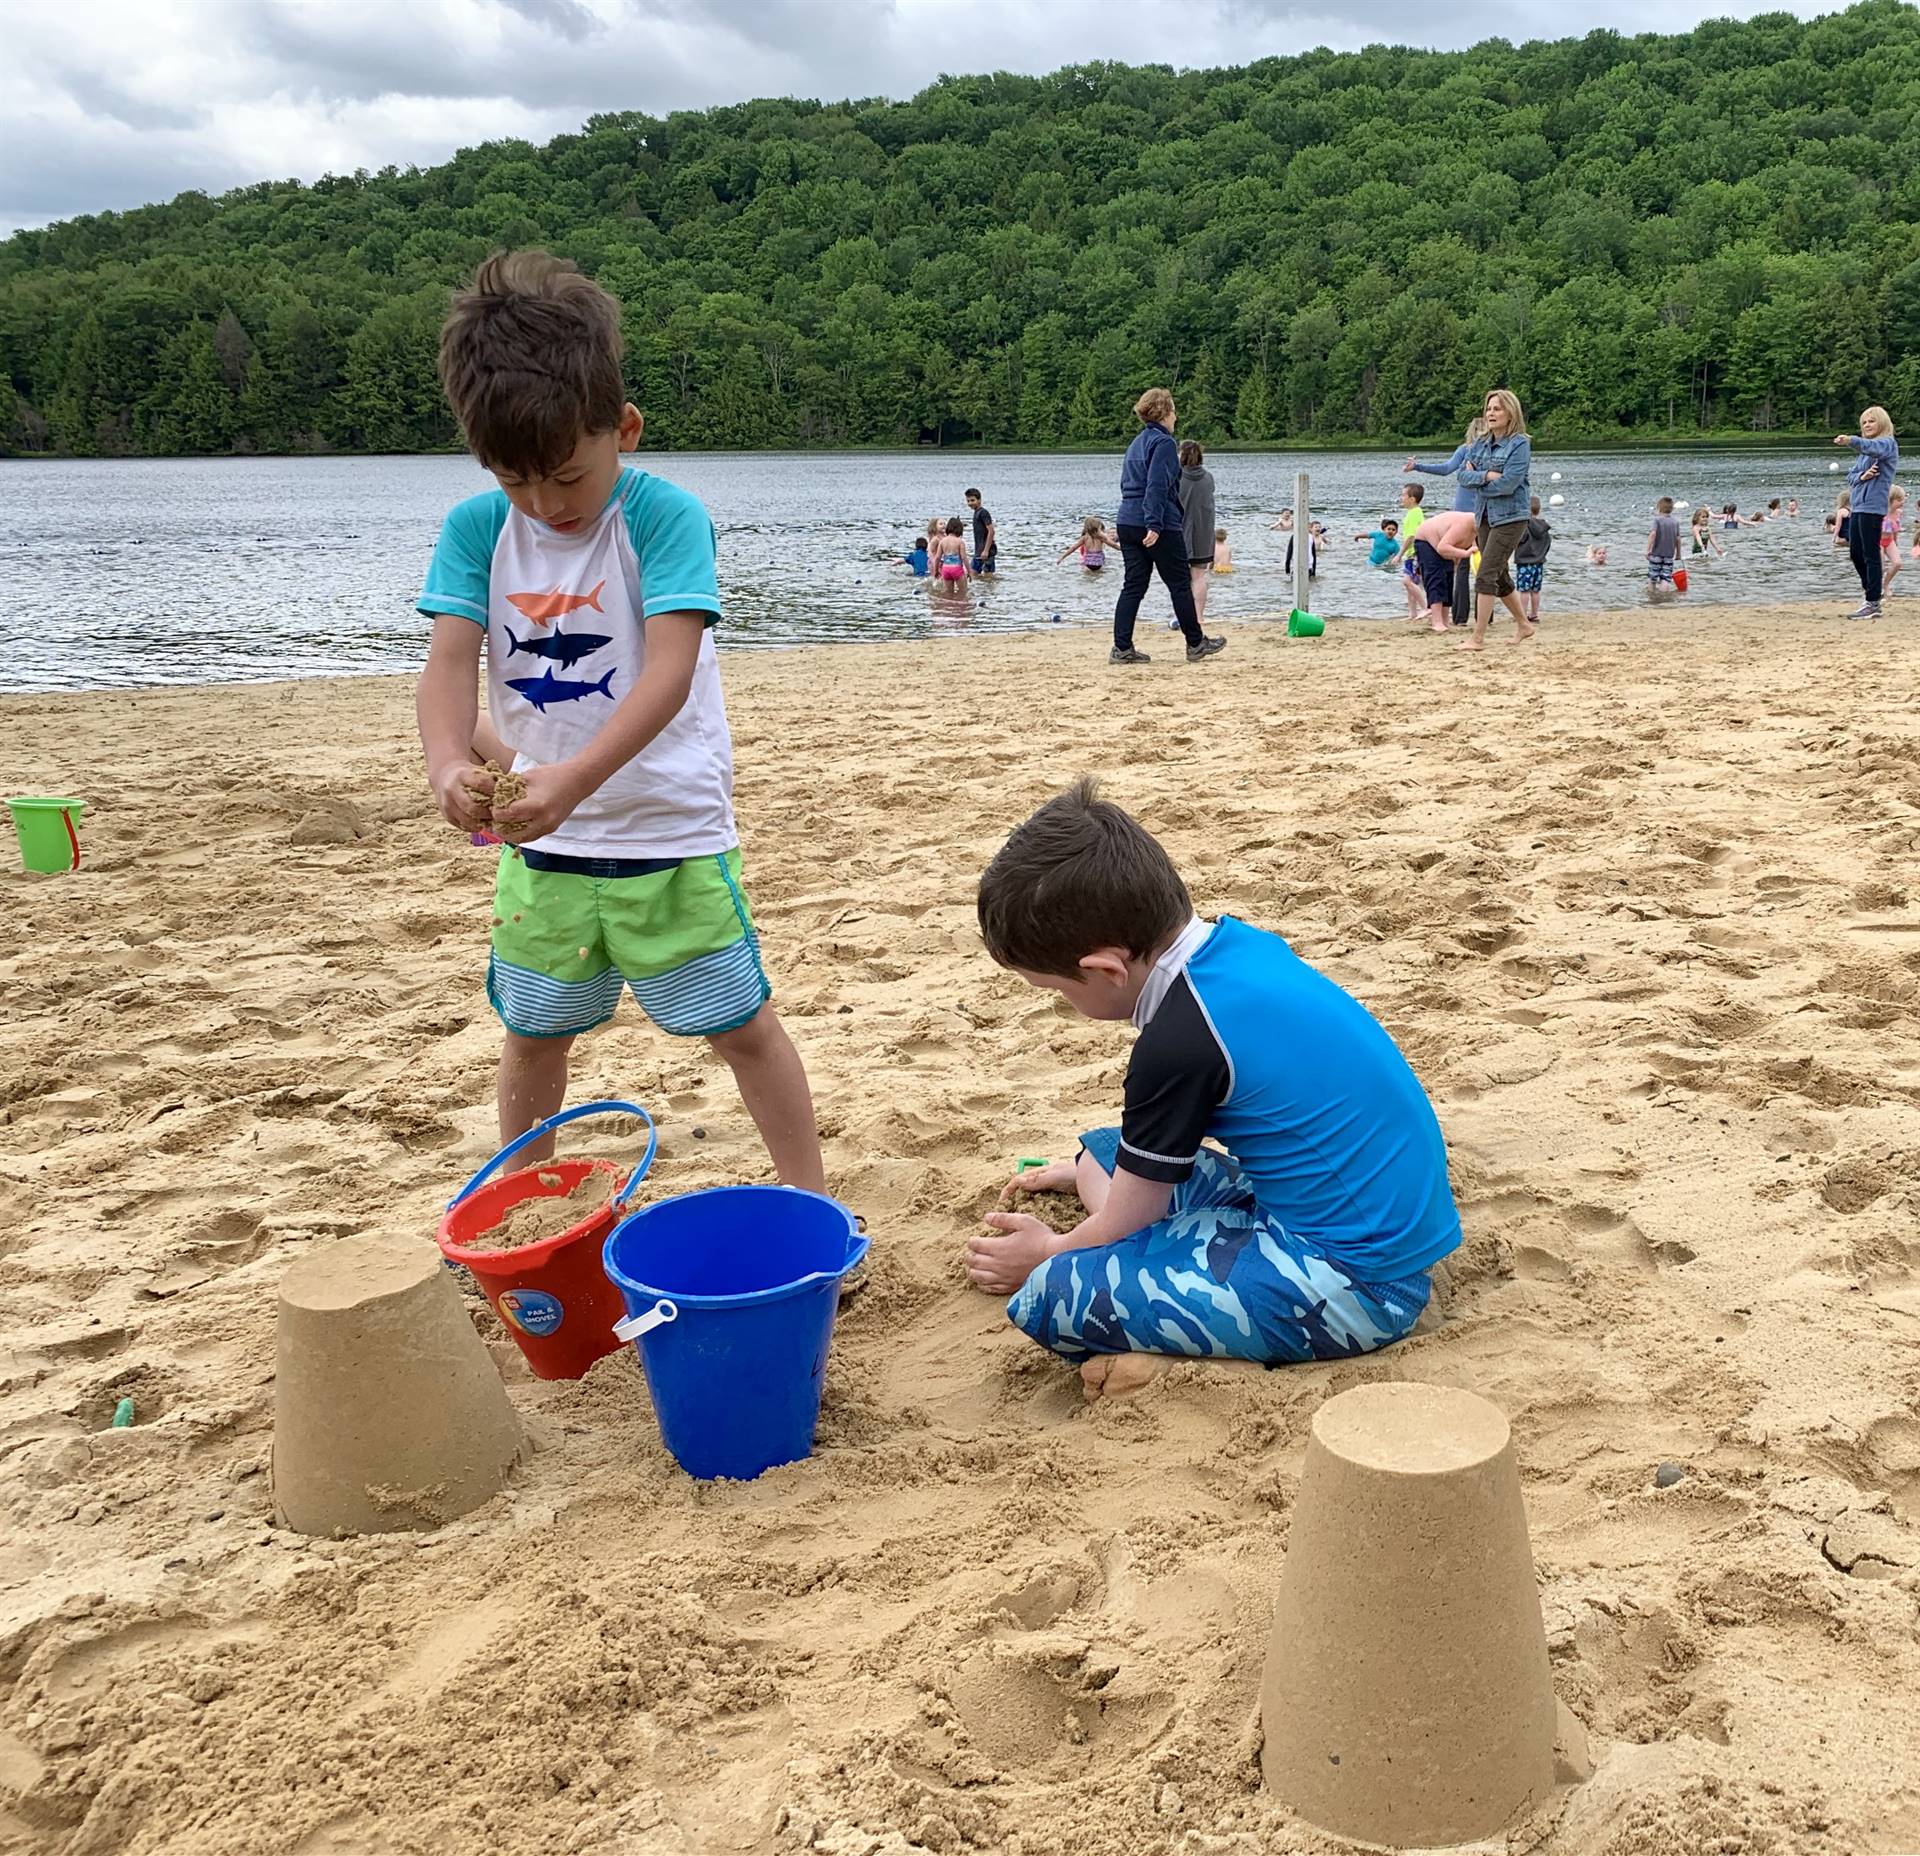 2 students play in sand.